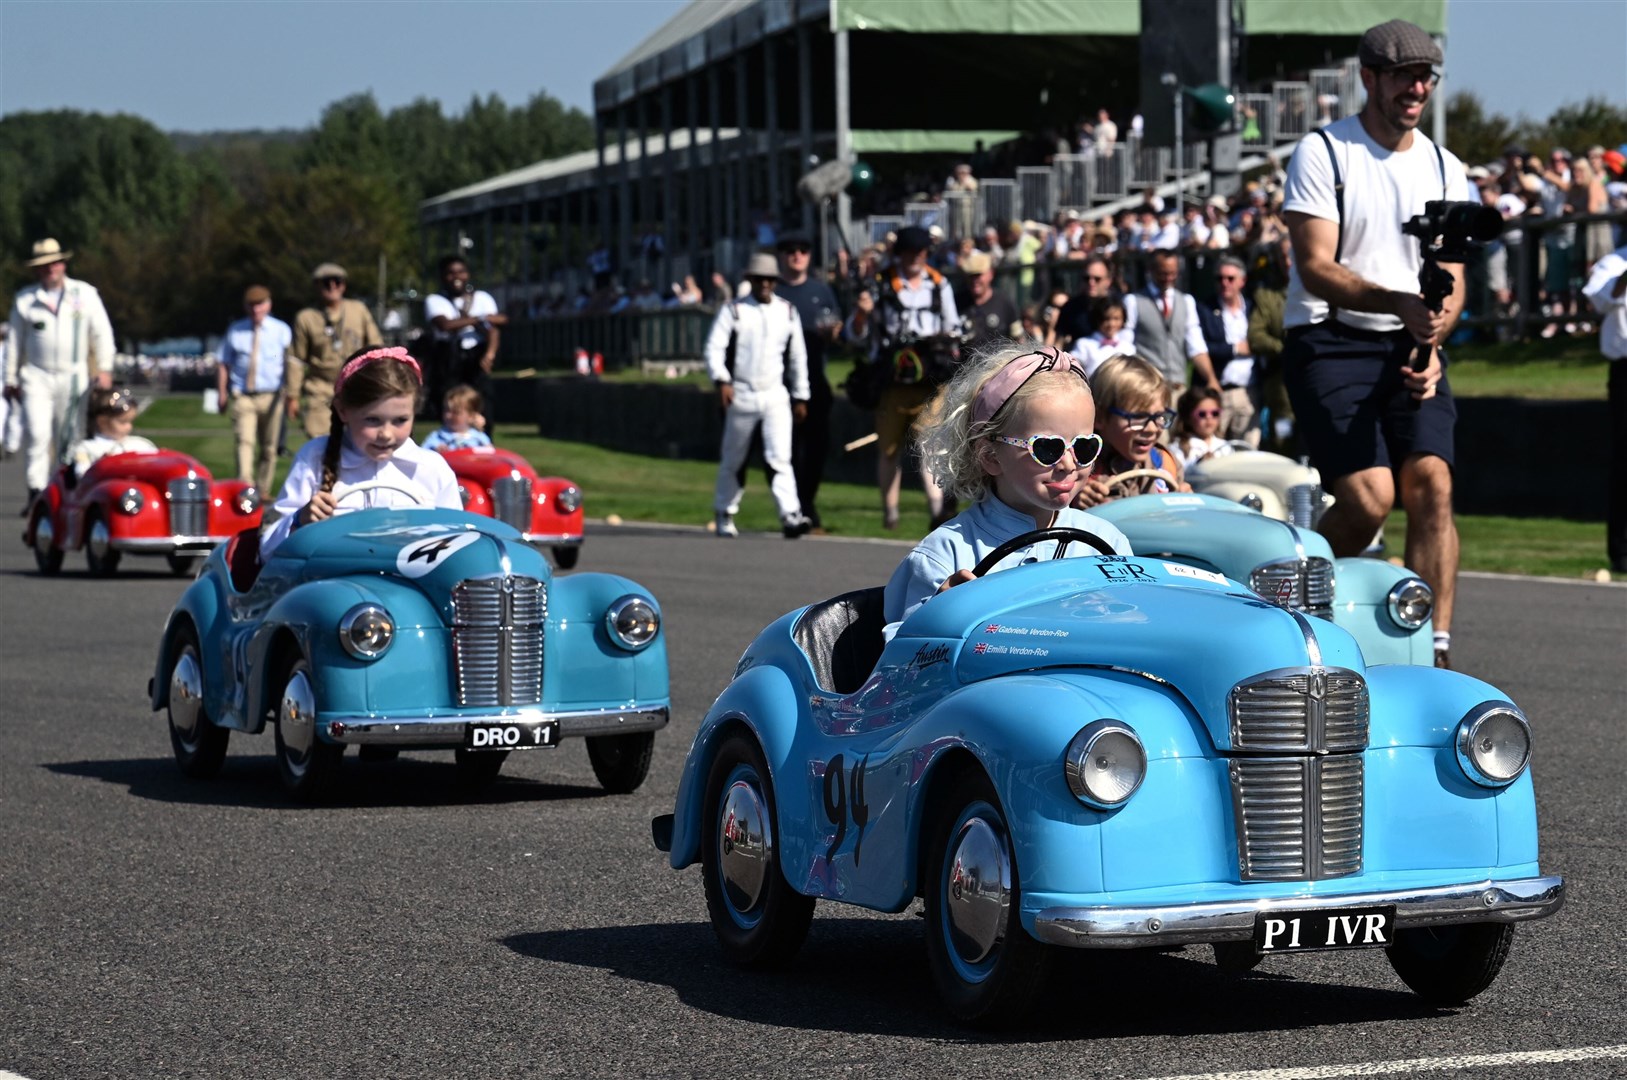 The event pays homage to Goodwood’s history, when it ranked alongside Silverstone as one of Britain’s premier race tracks until the mid-1960s (Kieran Cleeves/PA)